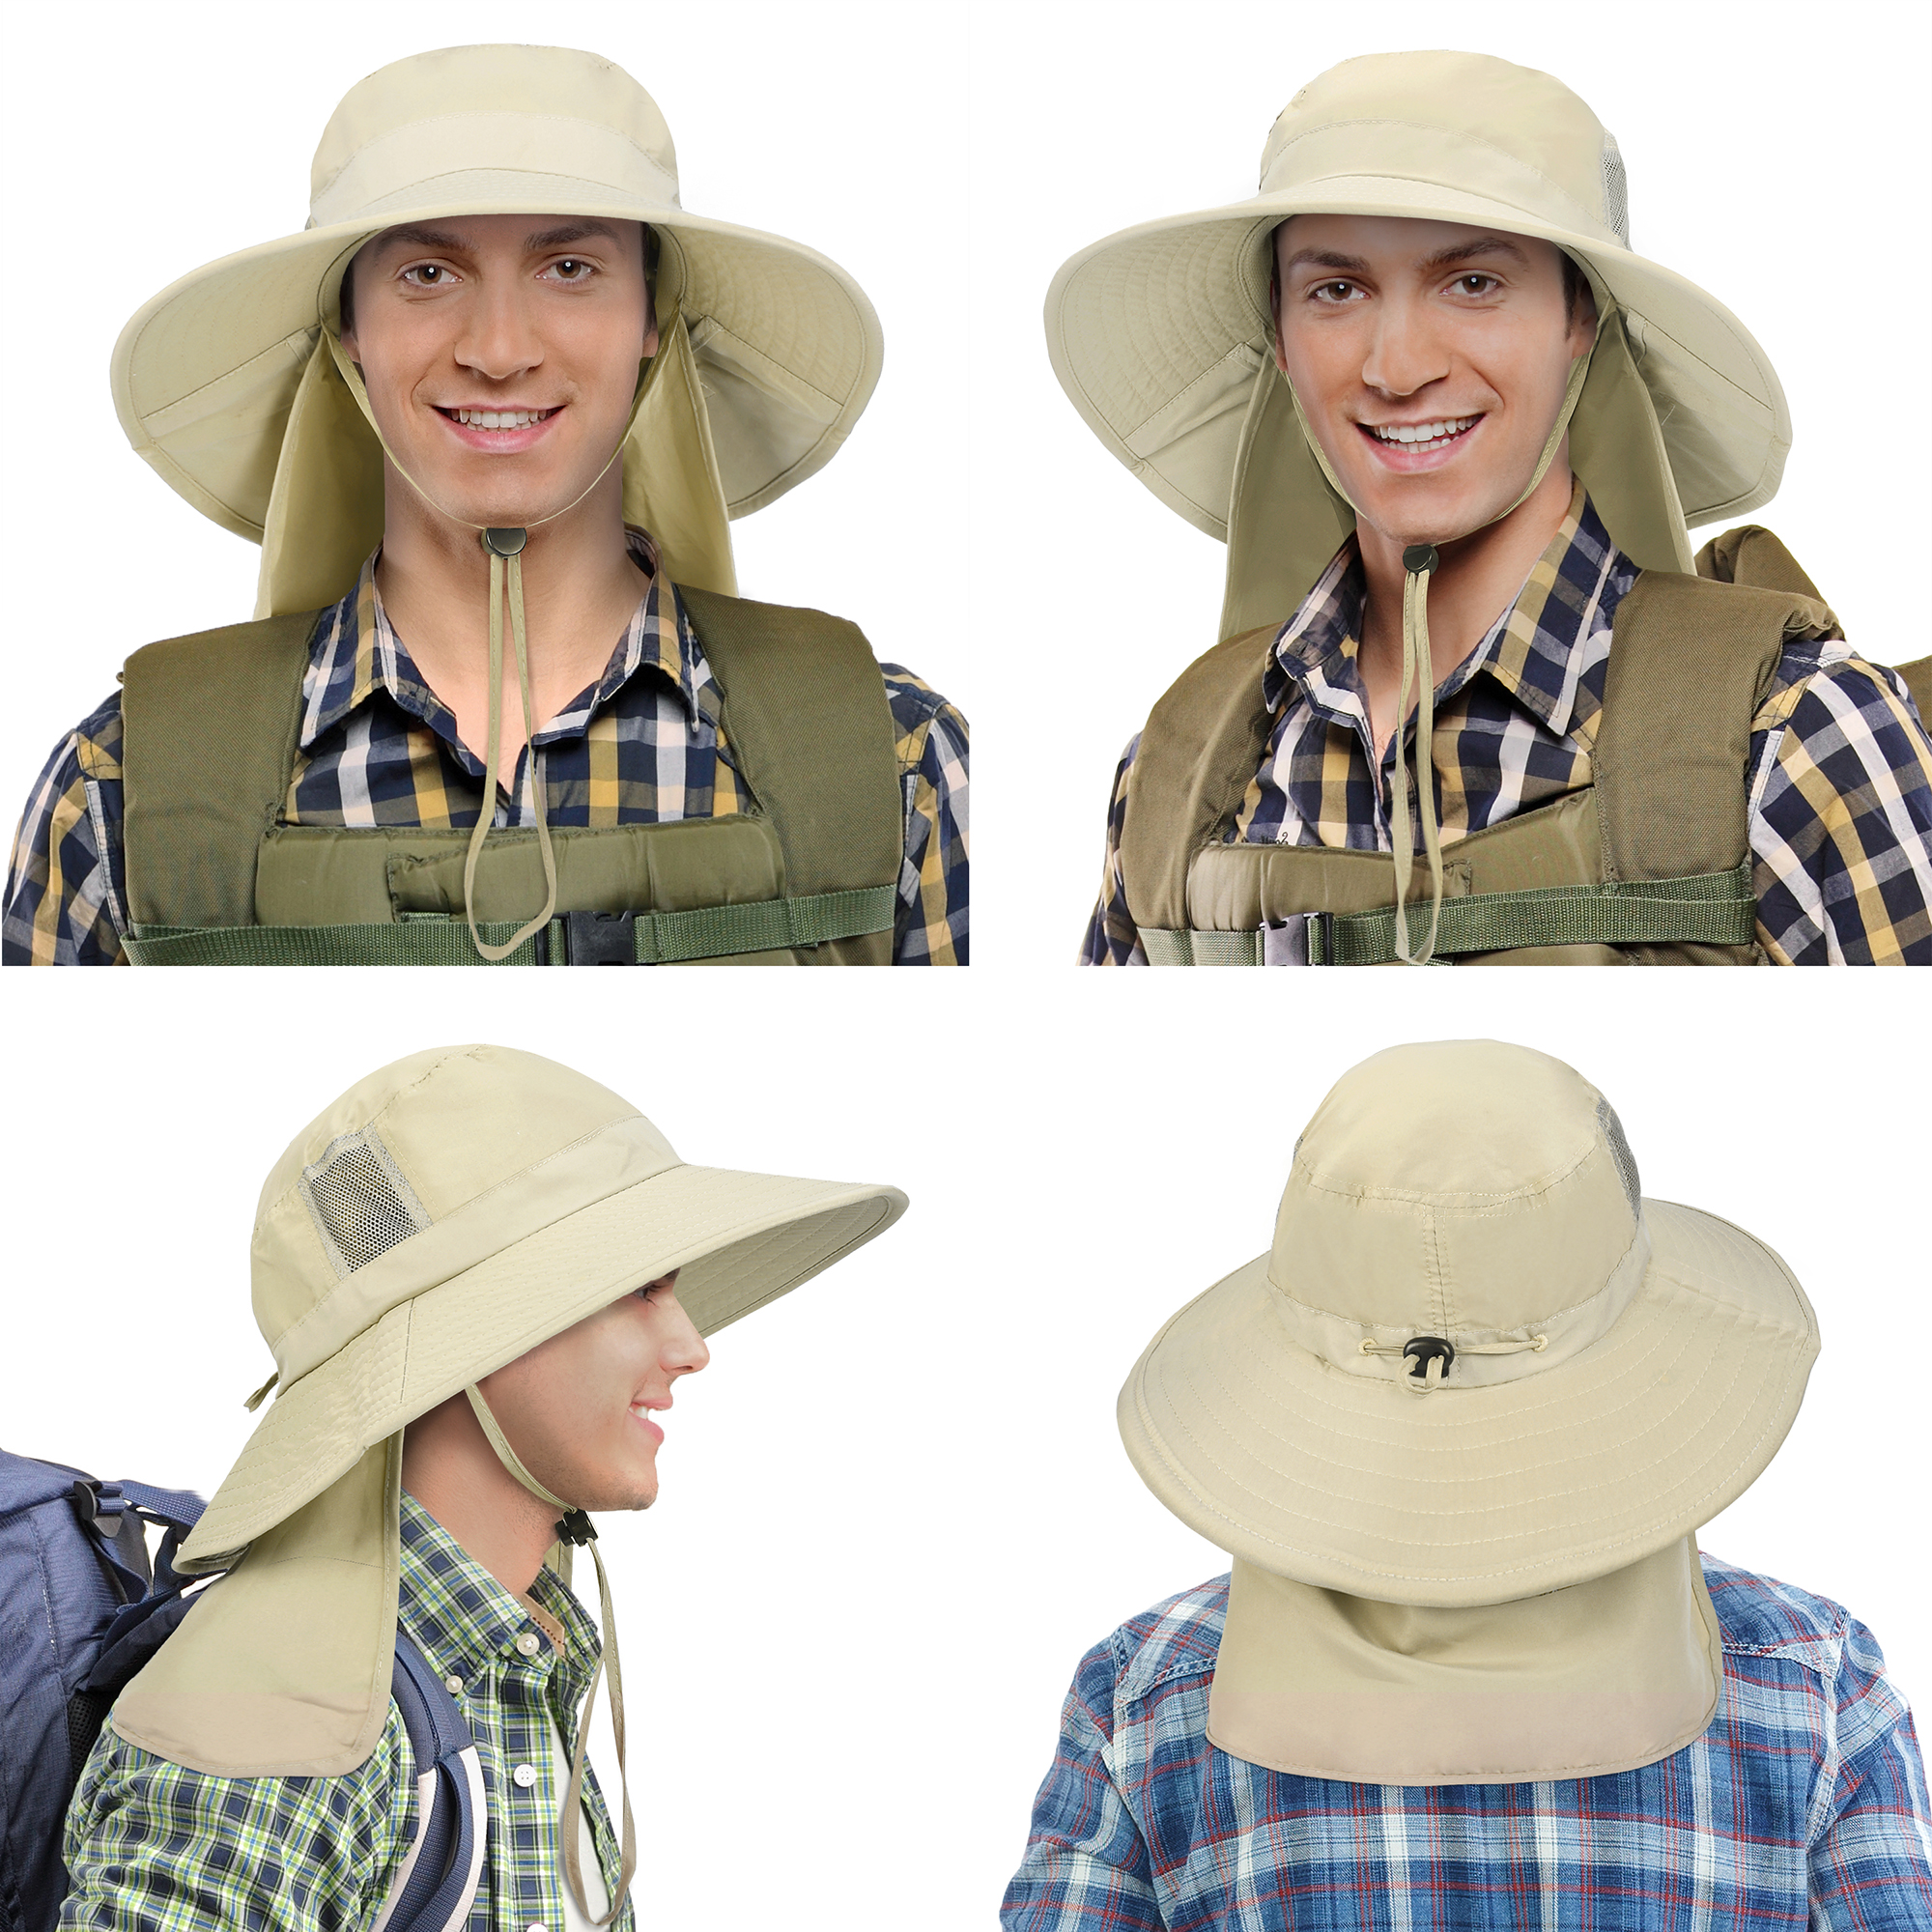 Men's Sun Hat with Neck Flap, Wide Brim Fishing Safari Hiking Hat, UPF 50+ Protection, Adjustable Chin Strap - image 4 of 7